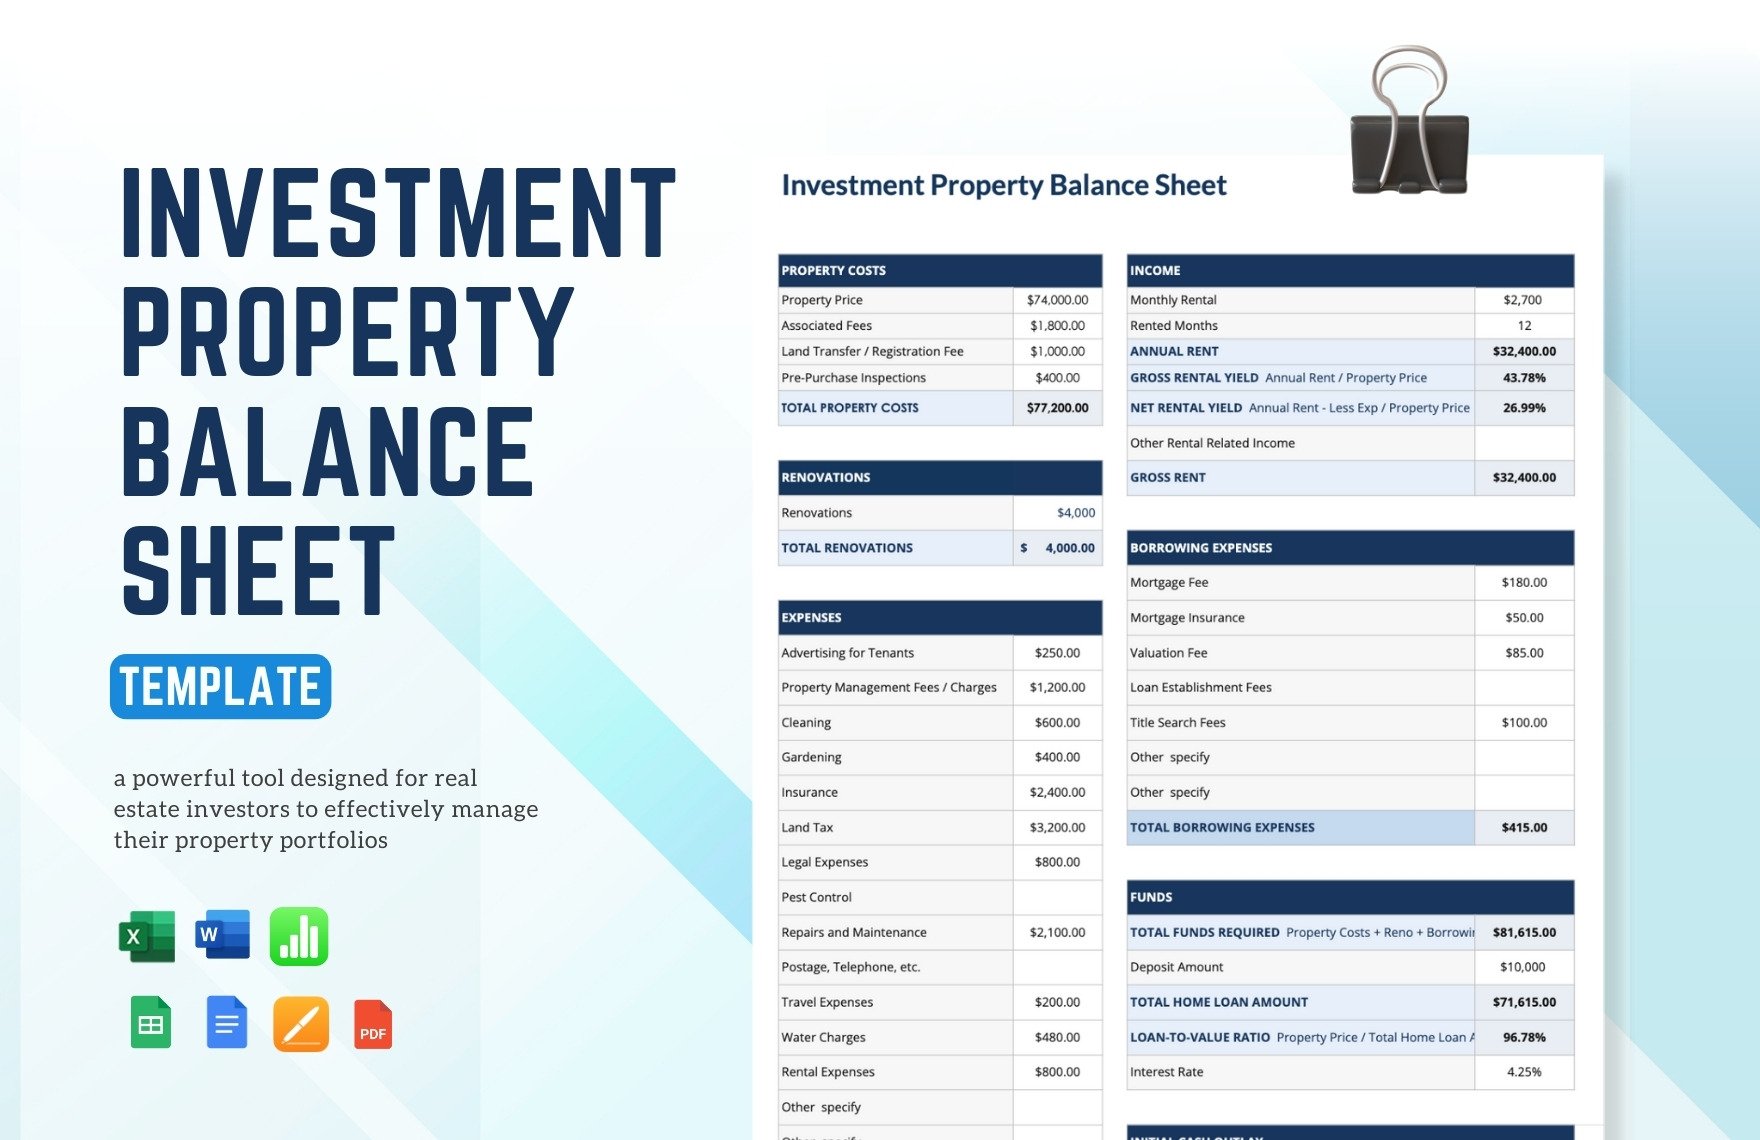 Investment Property Balance Sheet Template in Word, Google Docs, Excel, PDF, Google Sheets, Apple Pages, Apple Numbers